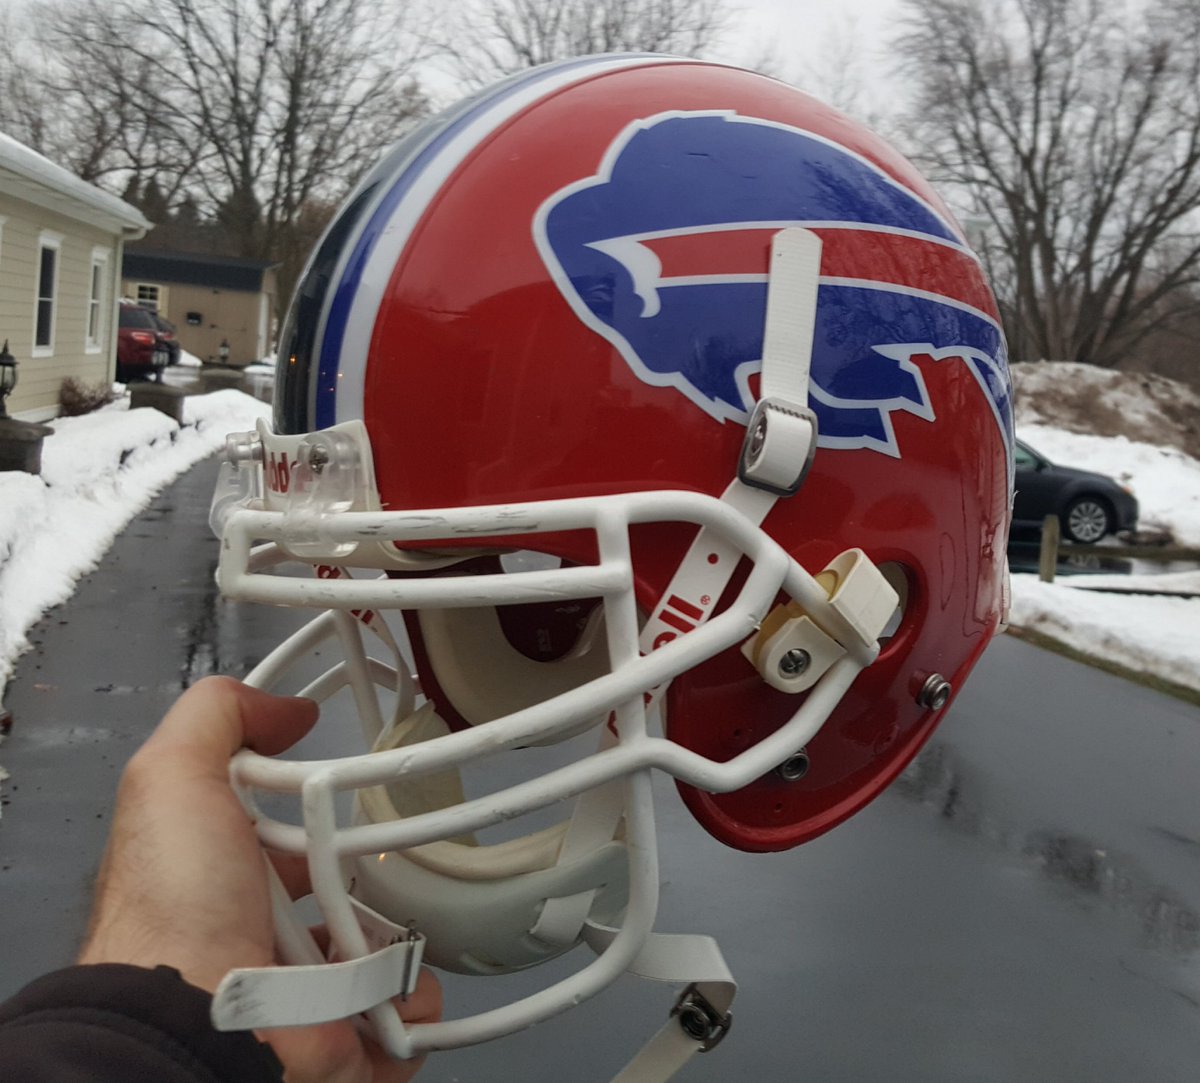 Bonnies Softball on X: 'Game worn Buffalo Bills helmet presented to  @Go_Bonnies @BonniesSoftball for their efforts to bring holiday cheer to  children in the Olean area, Buffalo area and Russia. Thanks to